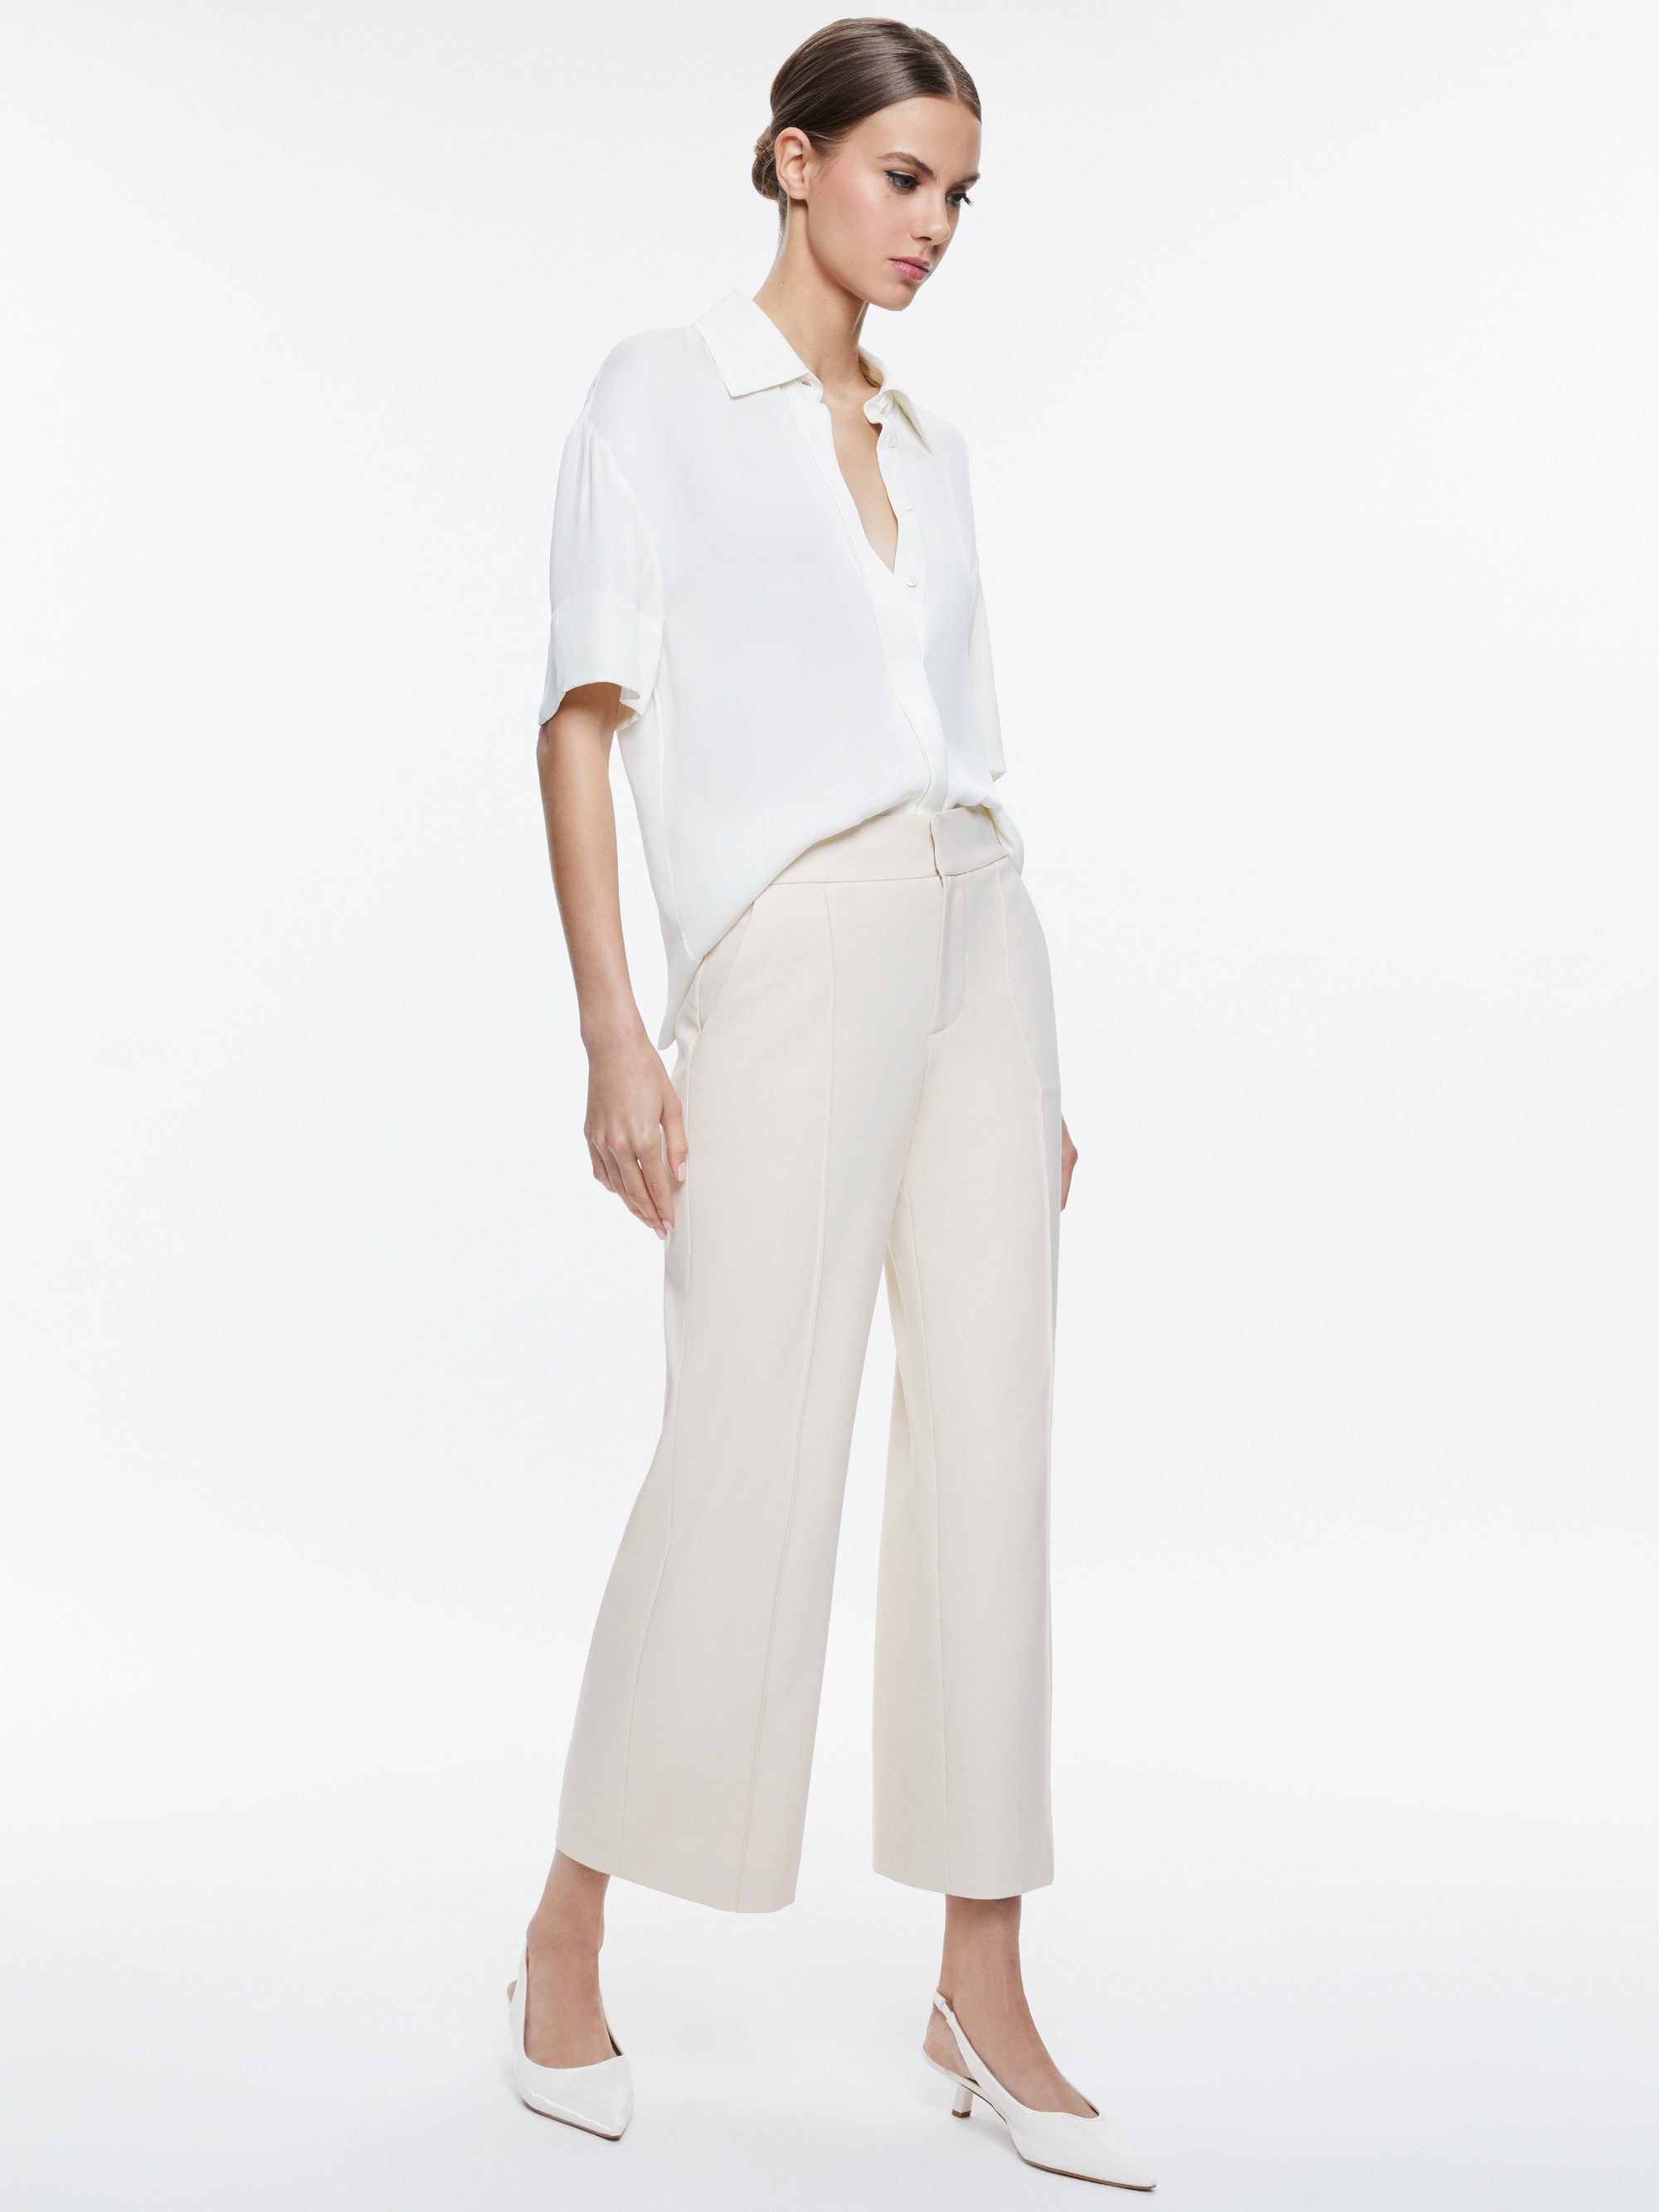 DYLAN HIGH RISE CROPPED PANT - 6